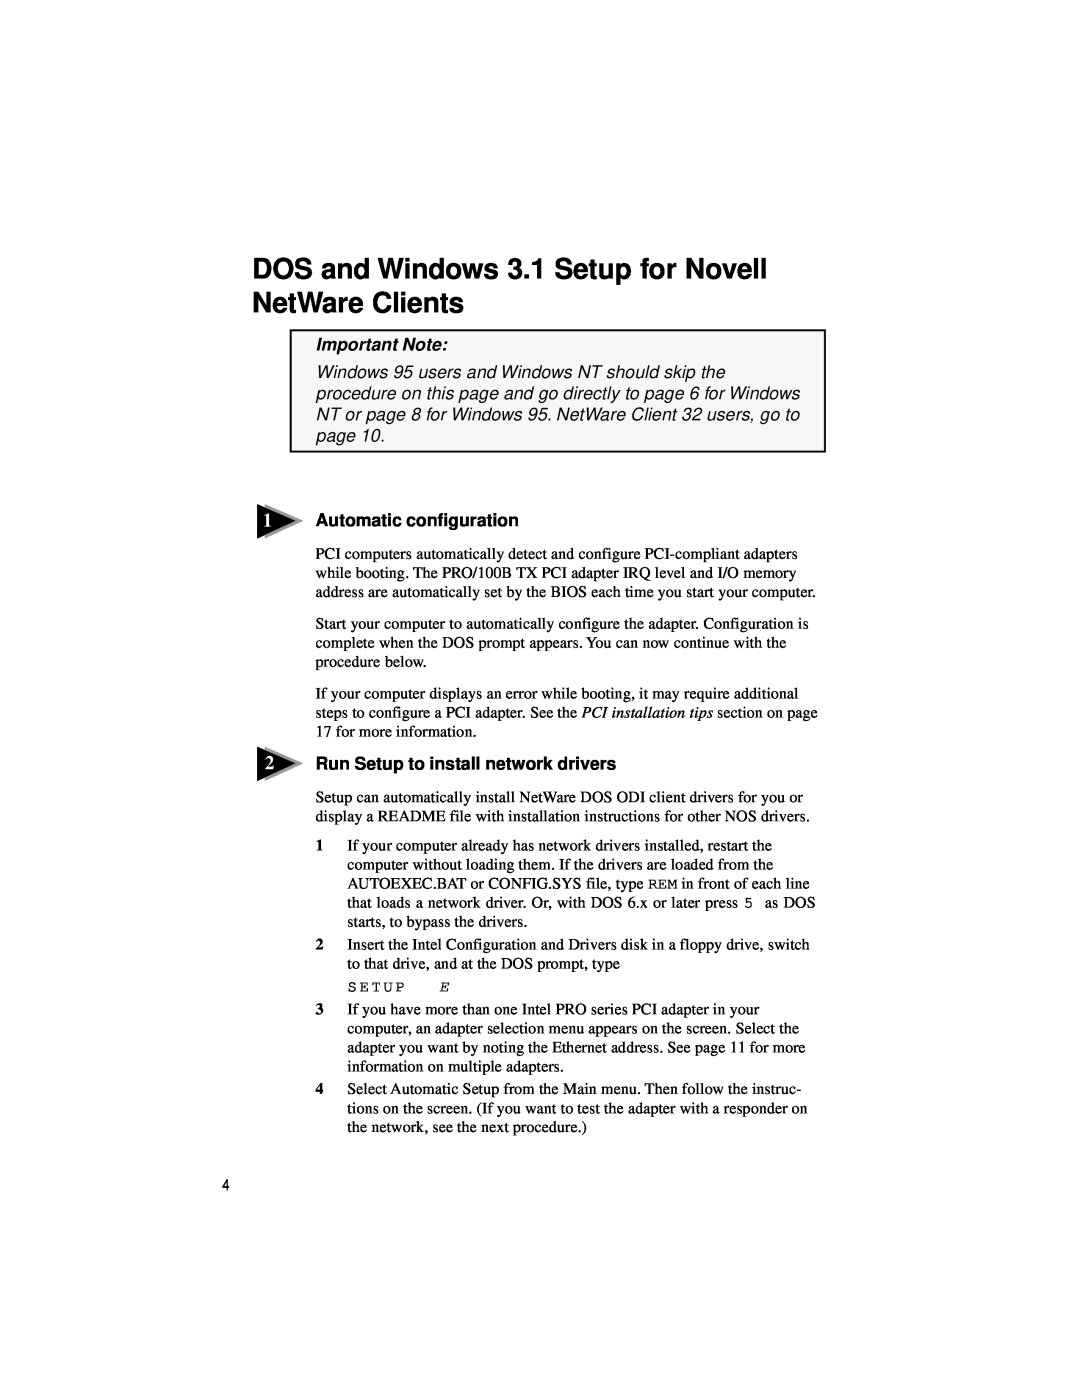 Intel PRO/100 TX PCI manual DOS and Windows 3.1 Setup for Novell NetWare Clients, Automatic configuration, Important Note 